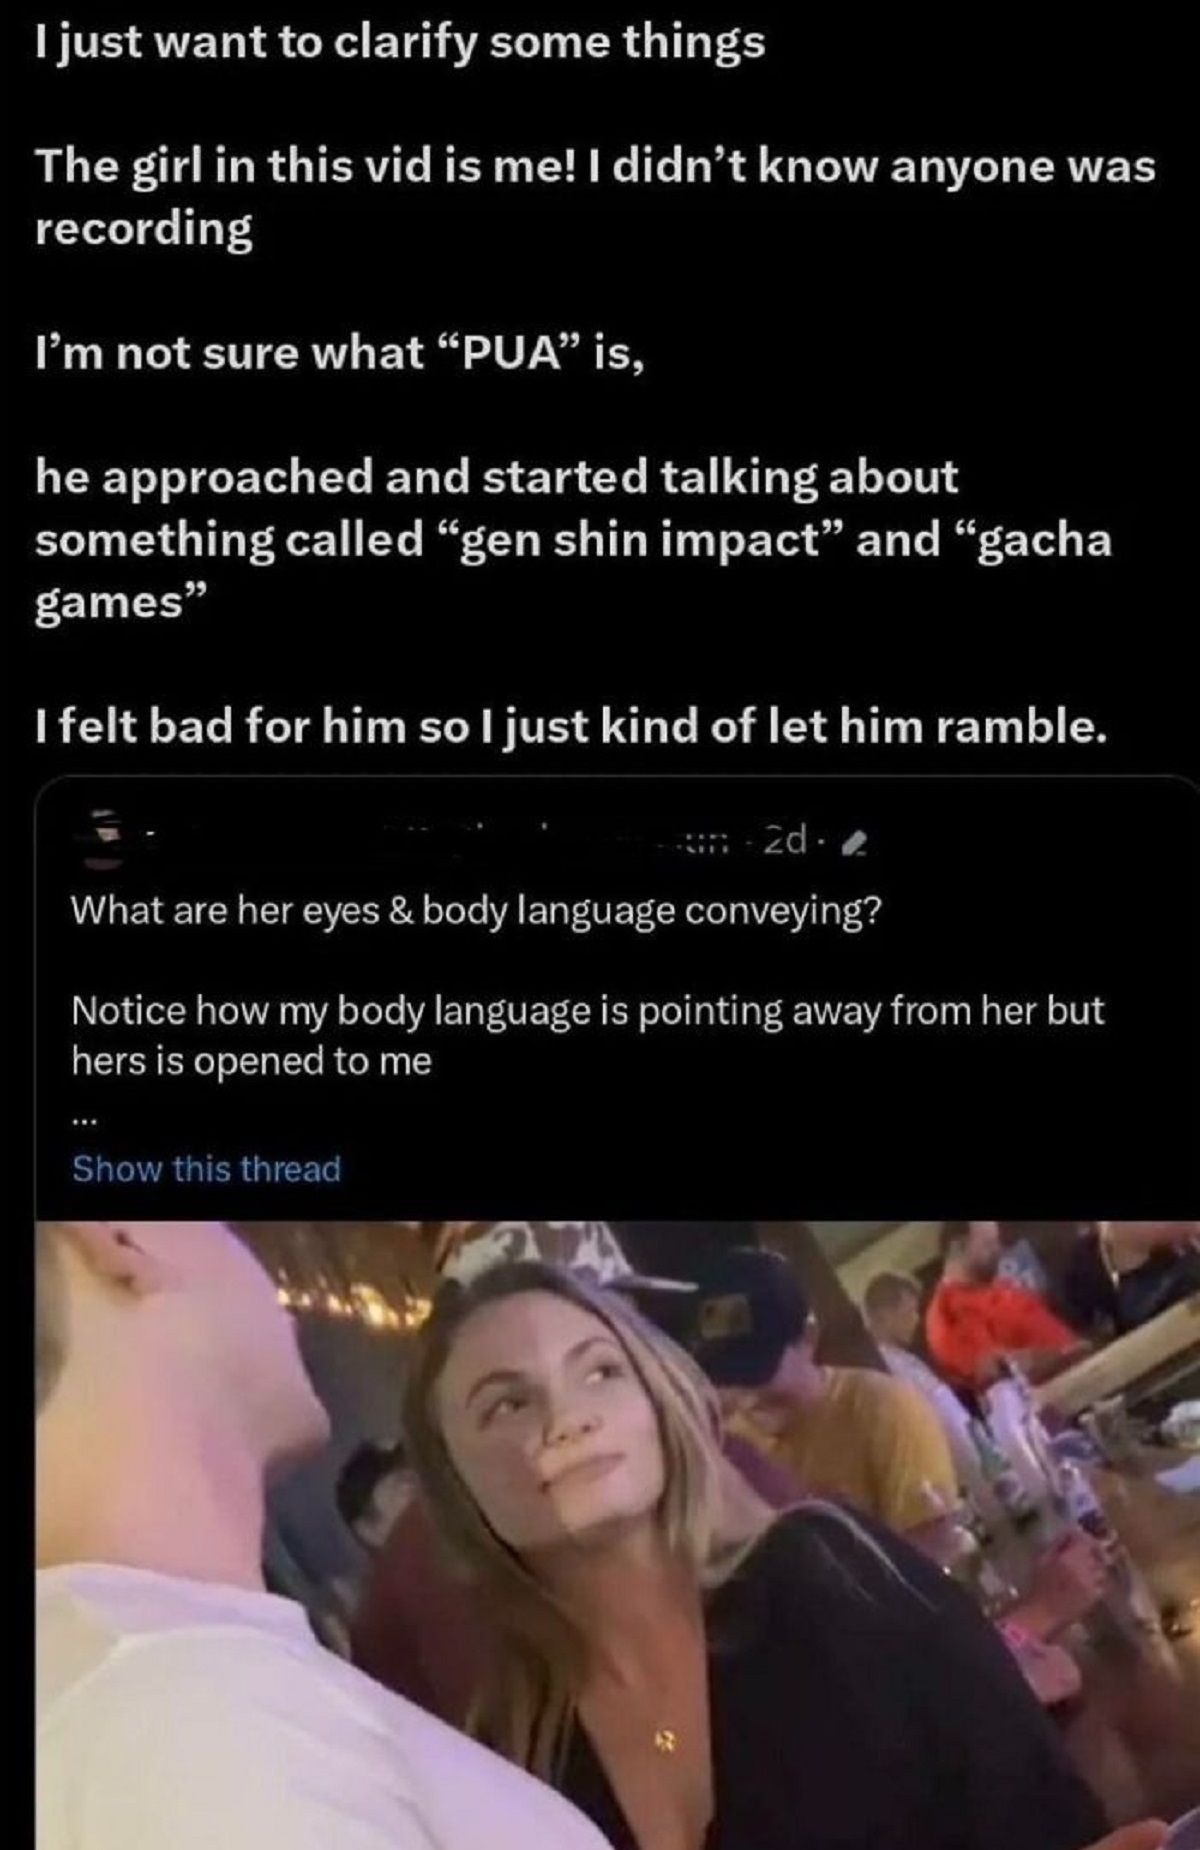 cringe pics - photo caption - I just want to clarify some things The girl in this vid is me! I didn't know anyone was recording I'm not sure what "Pua" is, he approached and started talking about something called "gen shin impact" and "gacha games" I felt